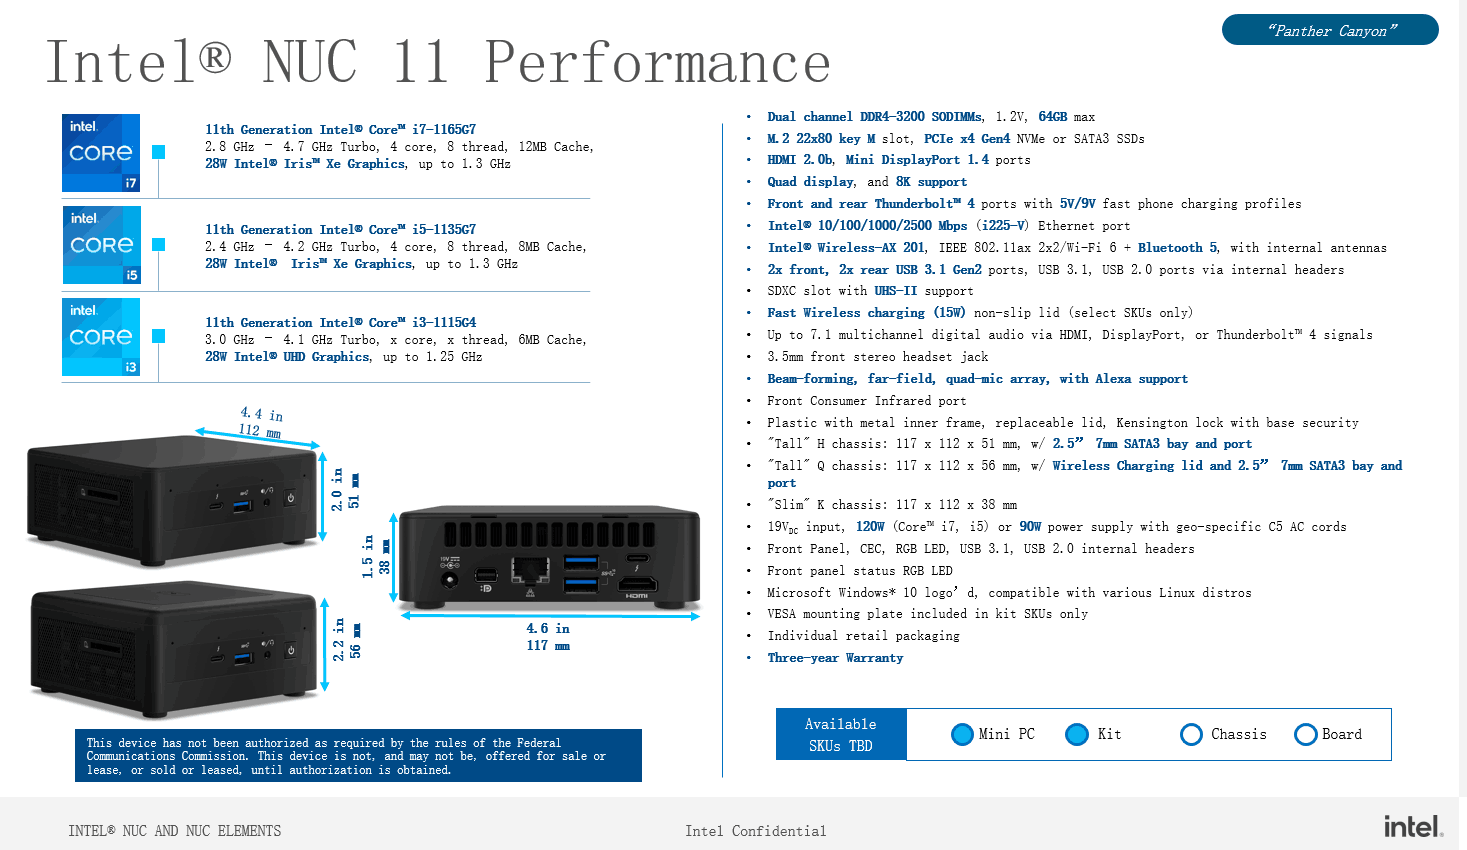 Intel NUC 11 Performance to arrive with up to a Core i7-1165G7 and